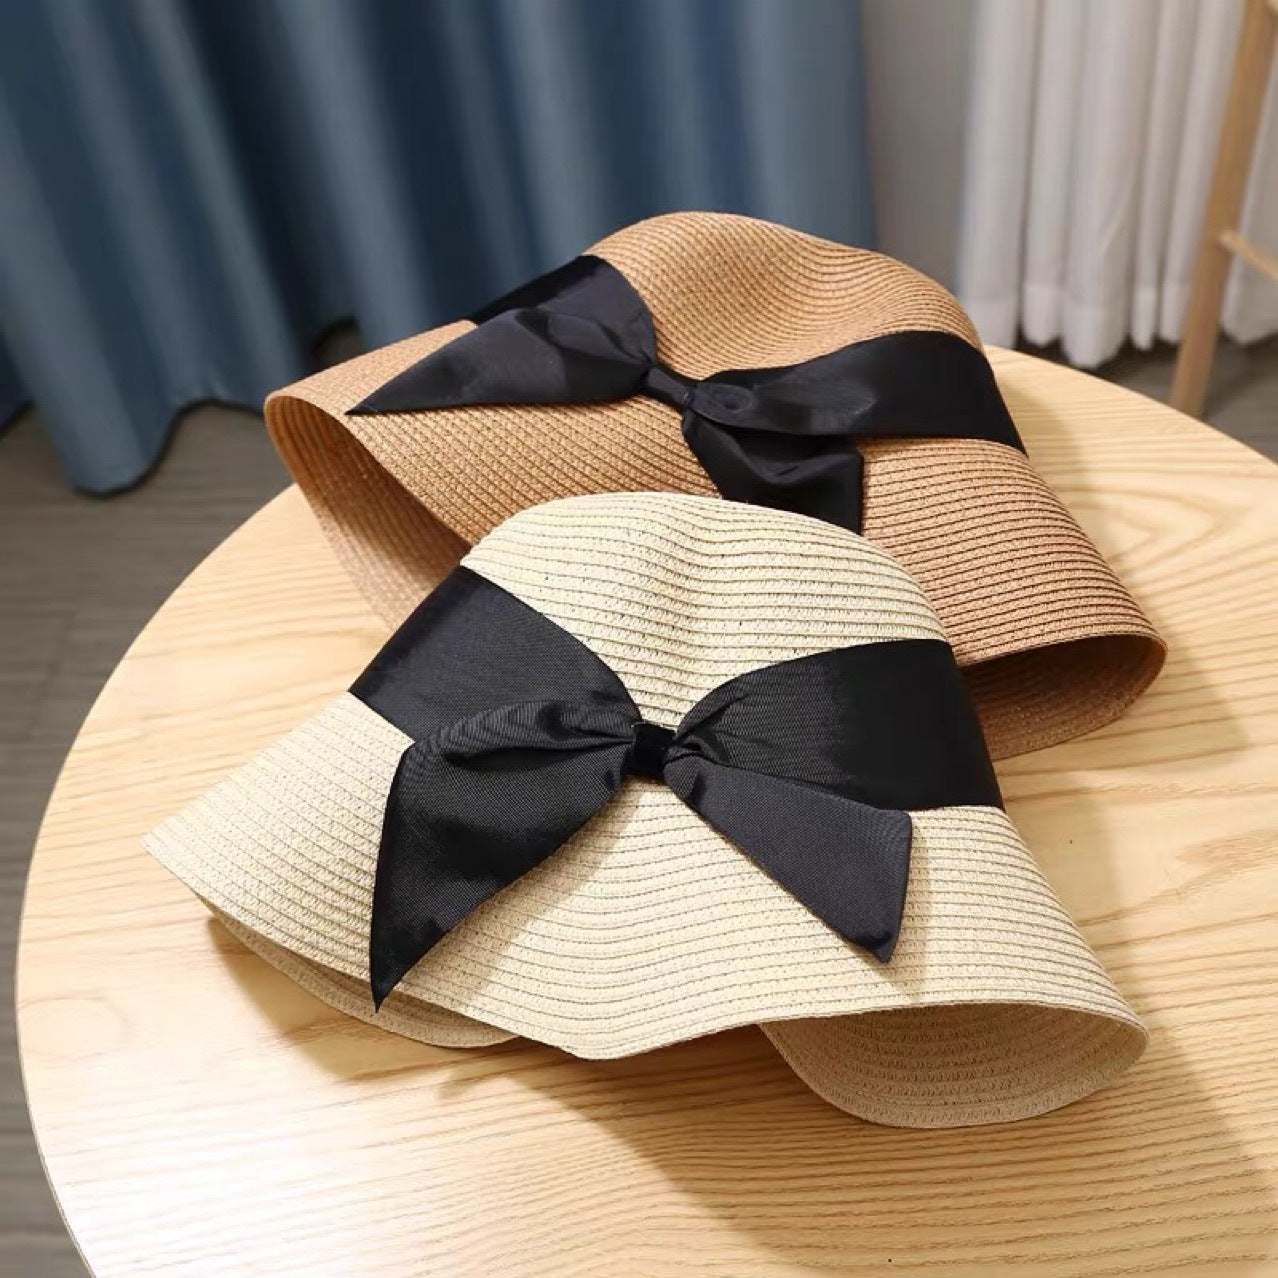 Two Beachy Cover Ups Straw Hat Foldable Beach Sunshades with black bows on top of a table.